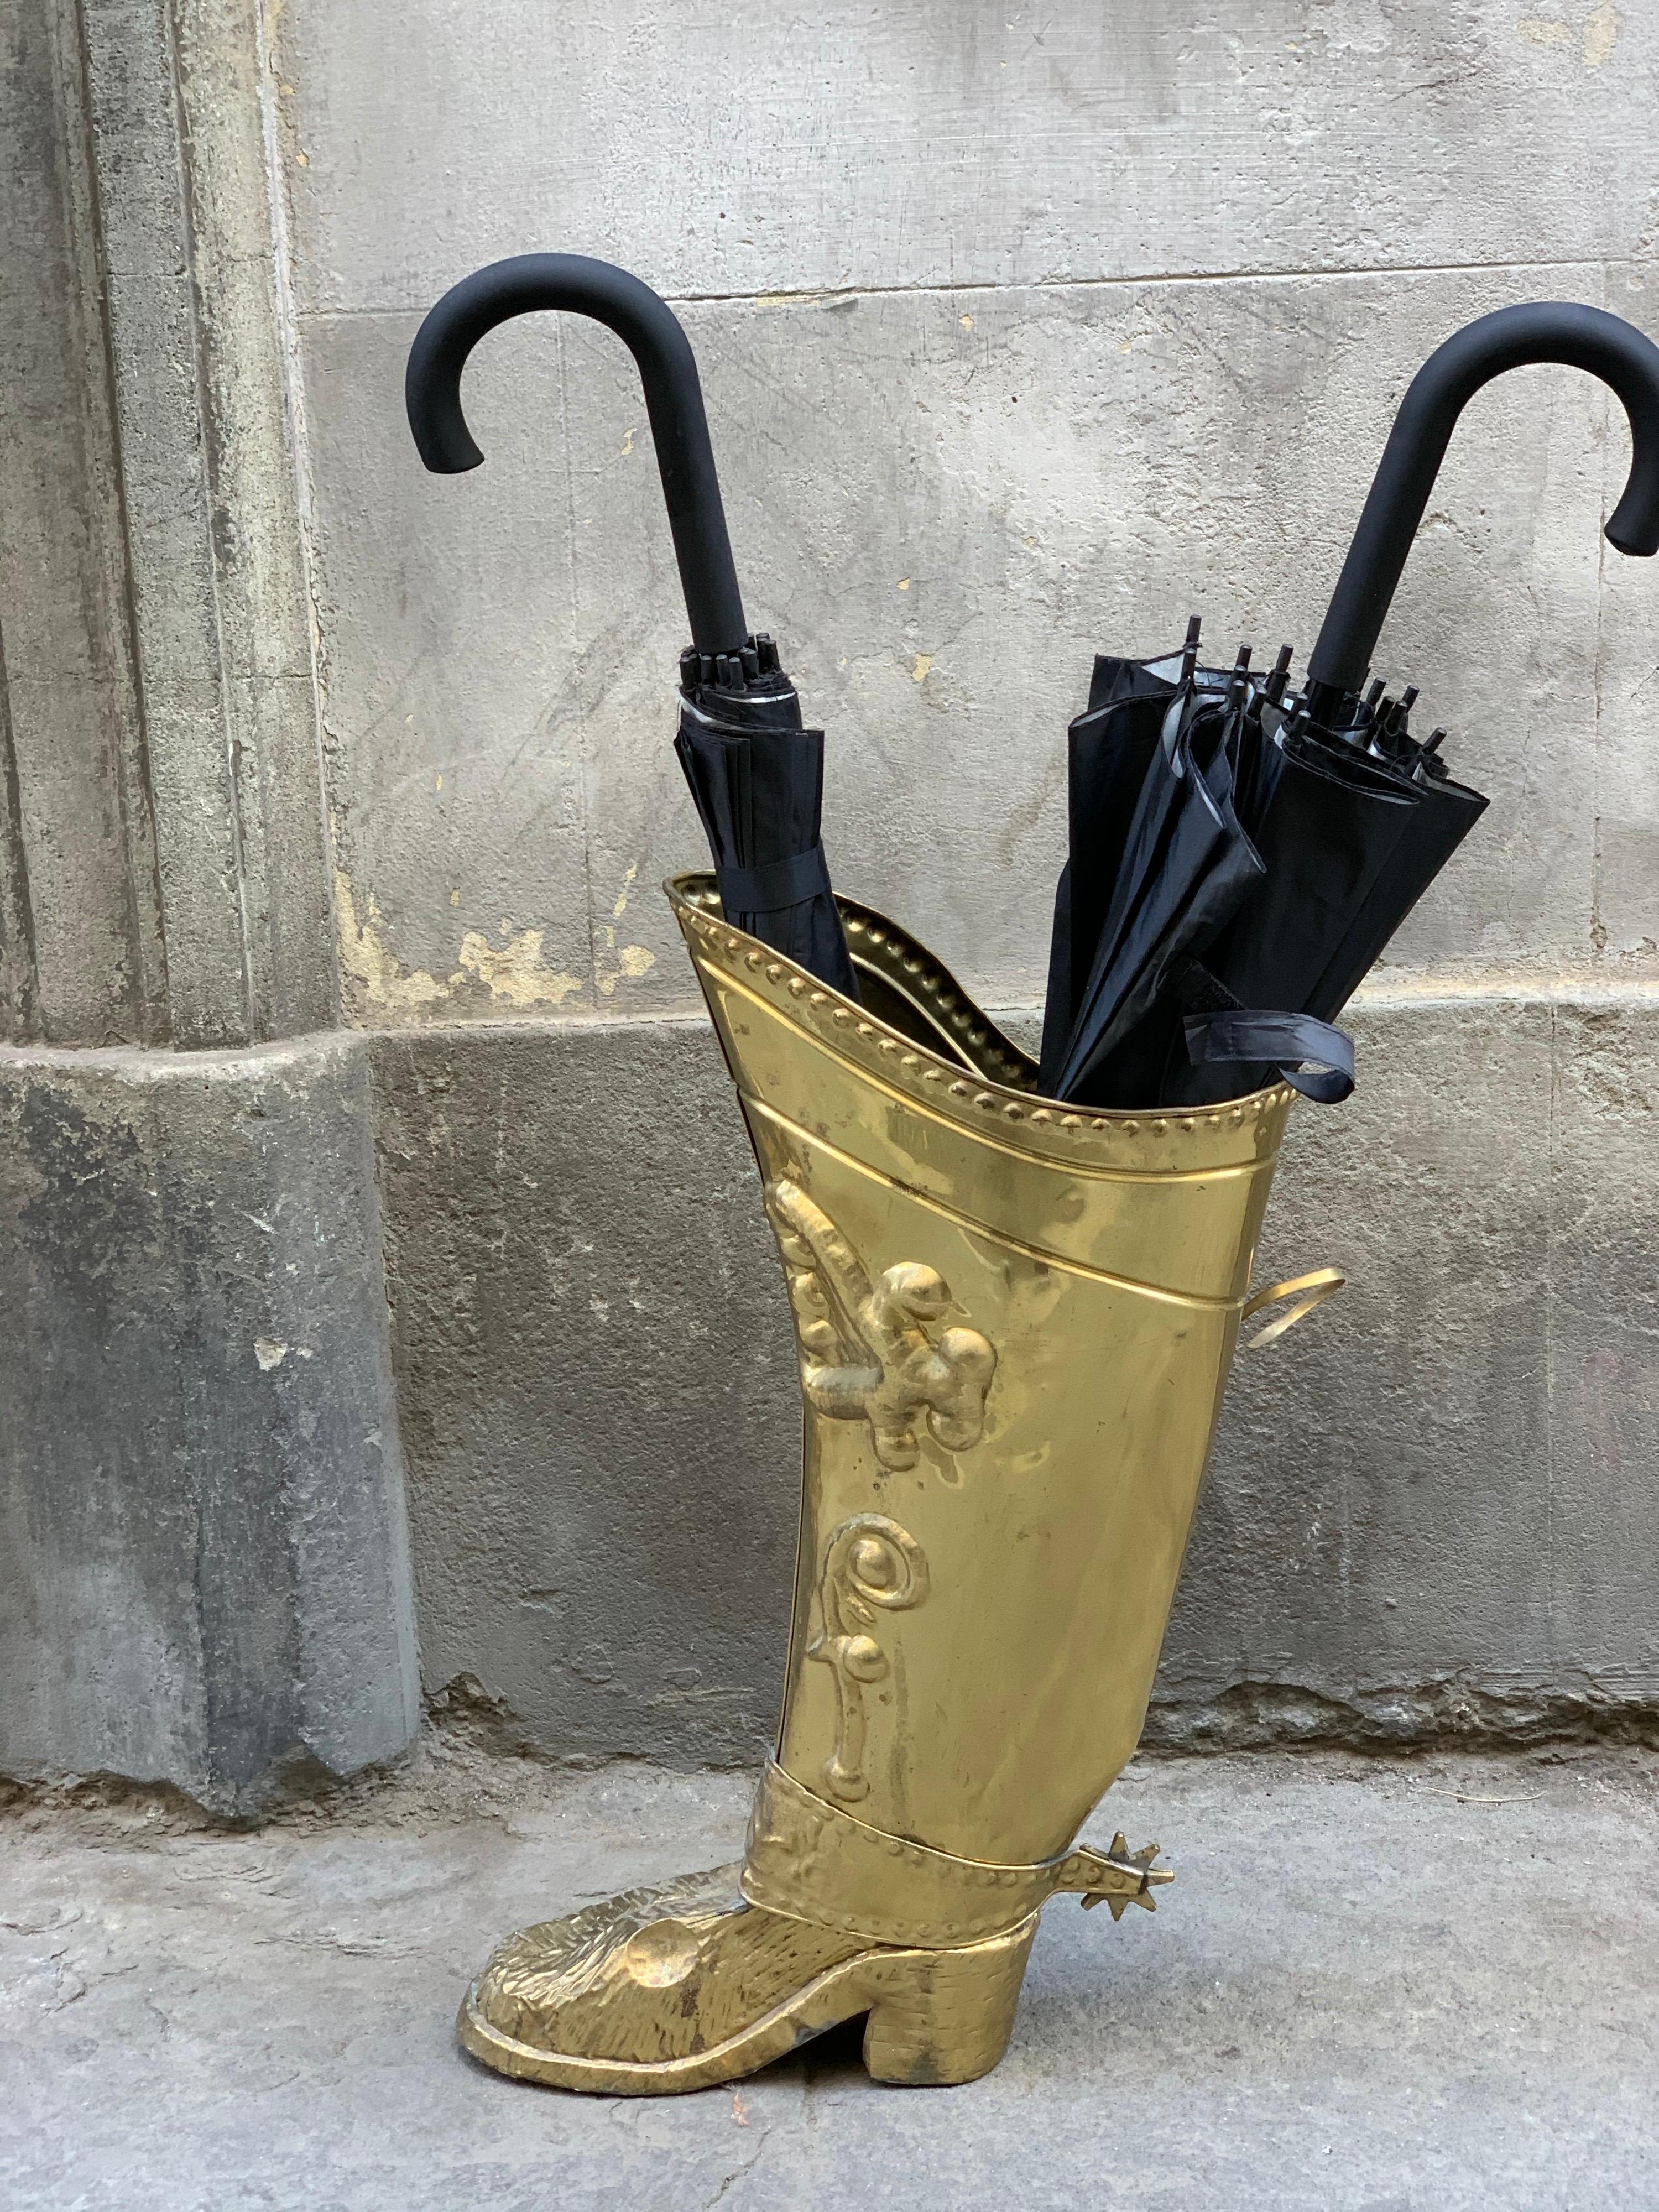 Vintage French brass boot umbrella stand.
A fun hand-hammered brass boot umbrella holder.
Hold several umbrellas and perfect in the right private decor or for commercial use as well.
We have left the aged patinated to keep the vintage taste.

 